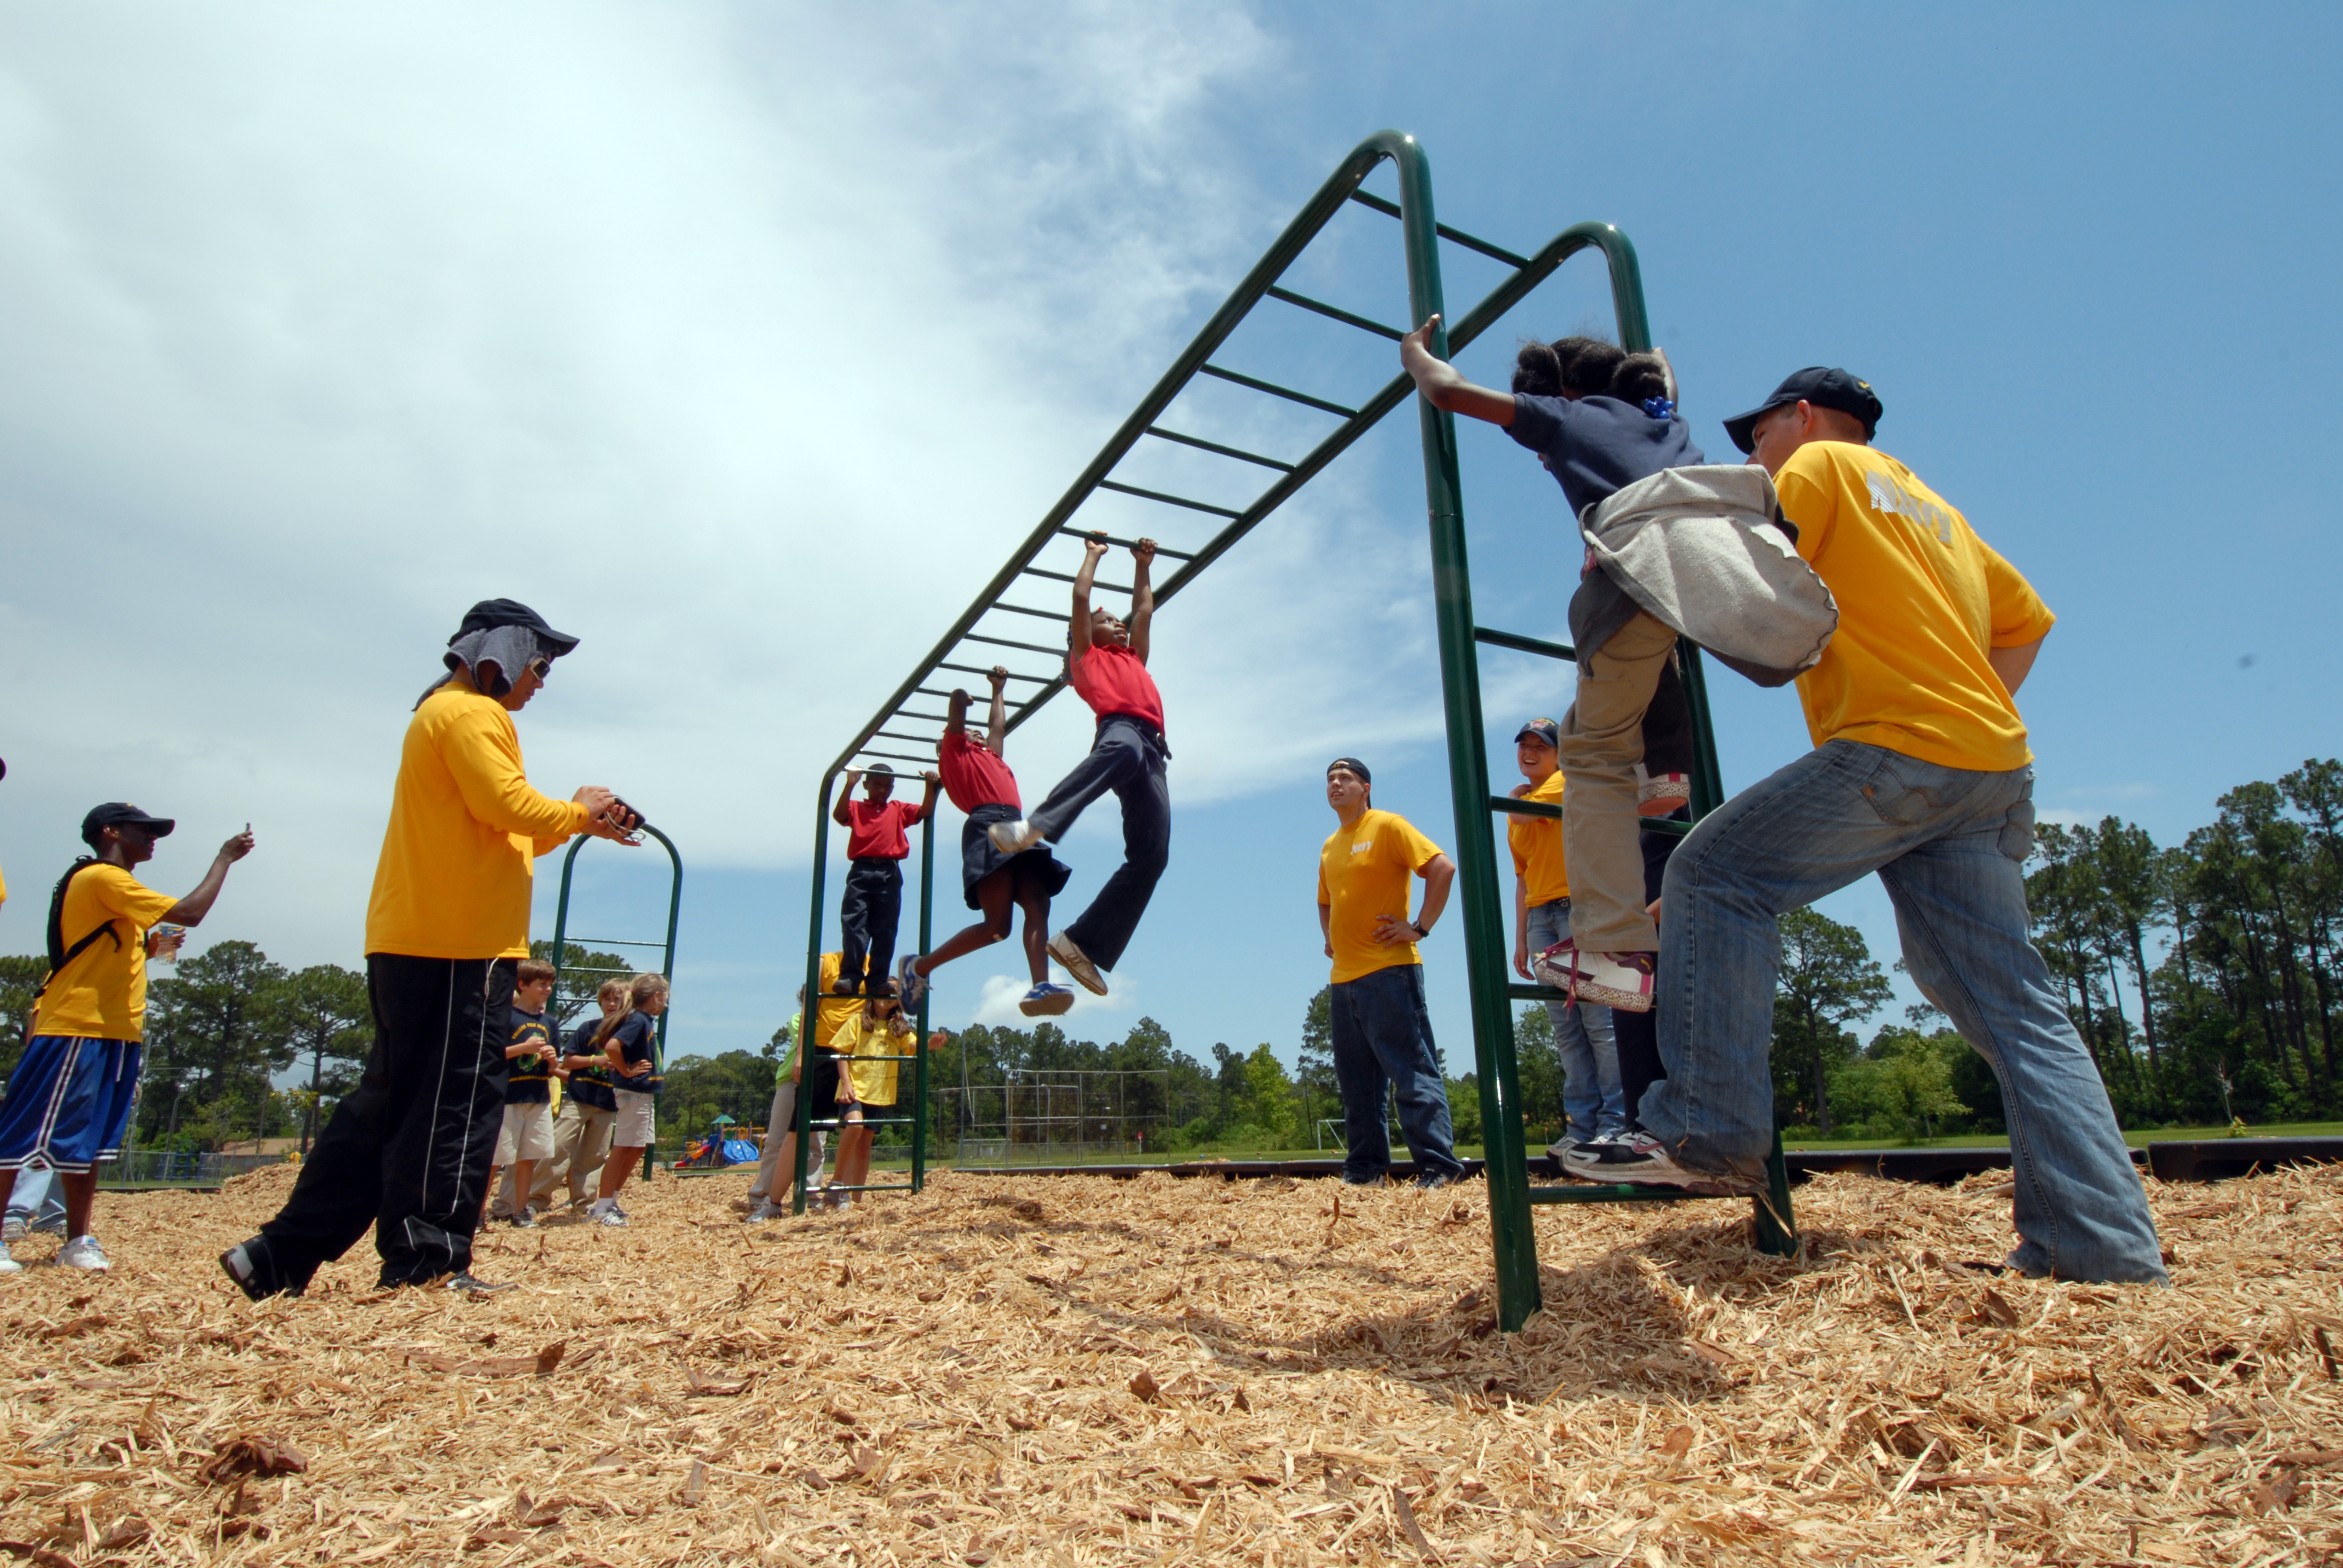 US Navy 090515-N-2565P-222 Sailors assigned to Pre-Commissioning Unit (PCU) Makin Island (LHD 8) watch students at College Park Elementary play on a $35,000 calisthenics playground